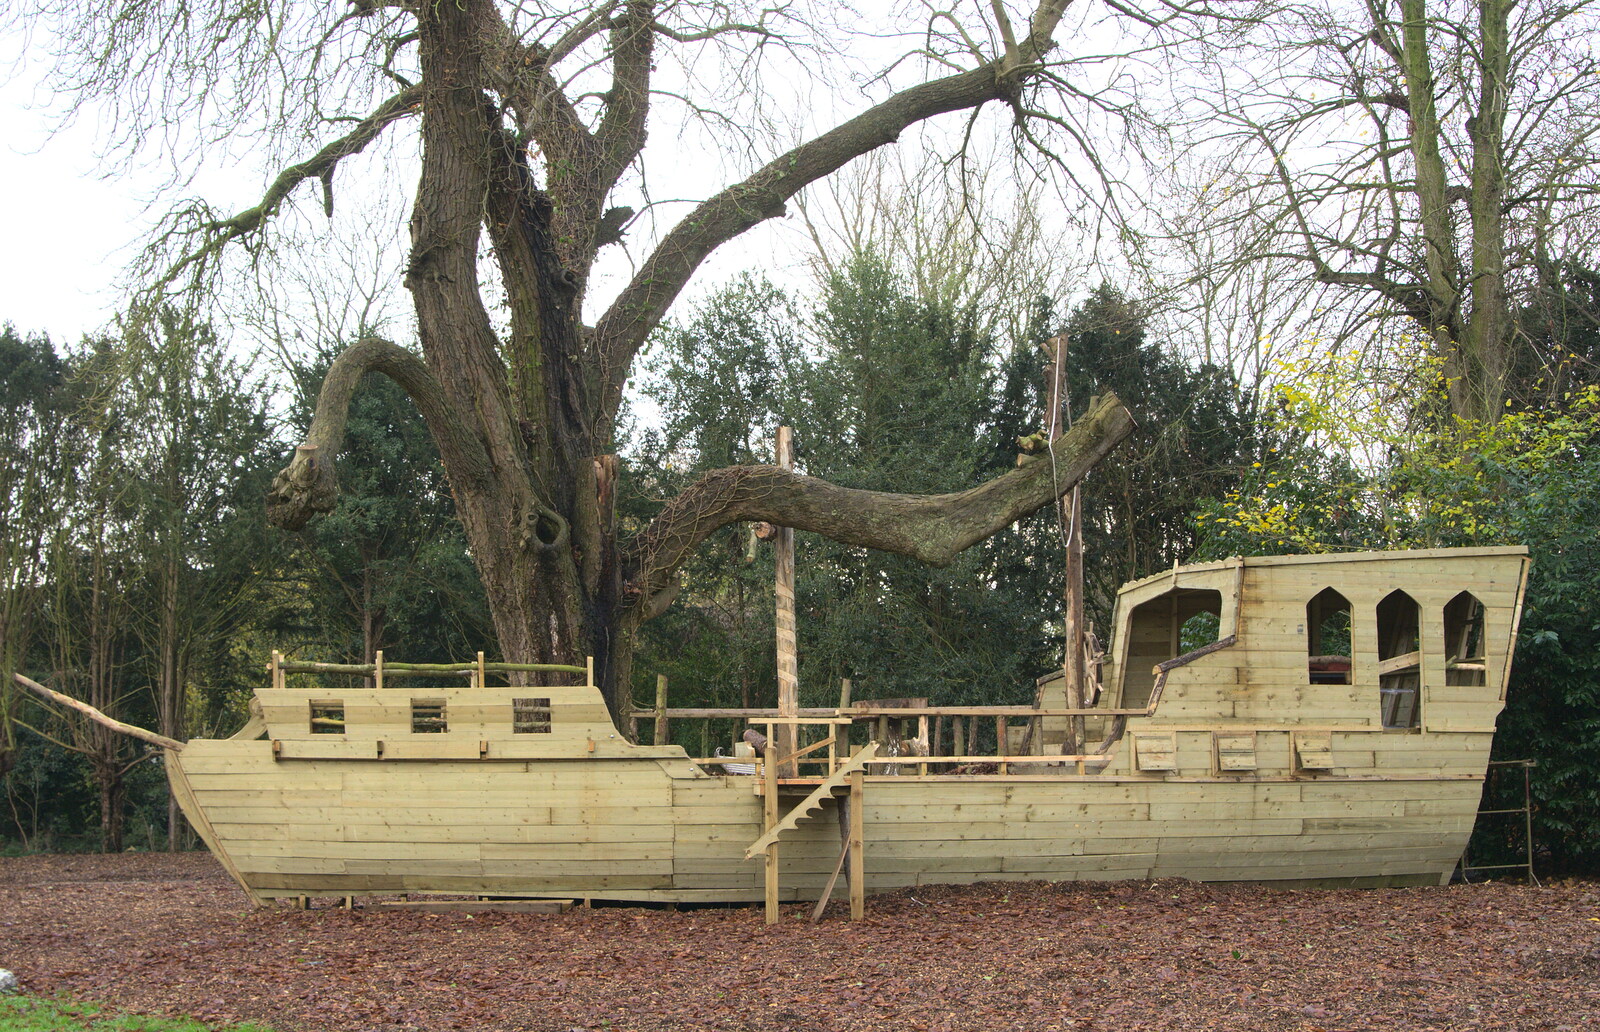 A side view of the pirate ship from The Lorry-Eating Pavement of Diss, Norfolk - 3rd December